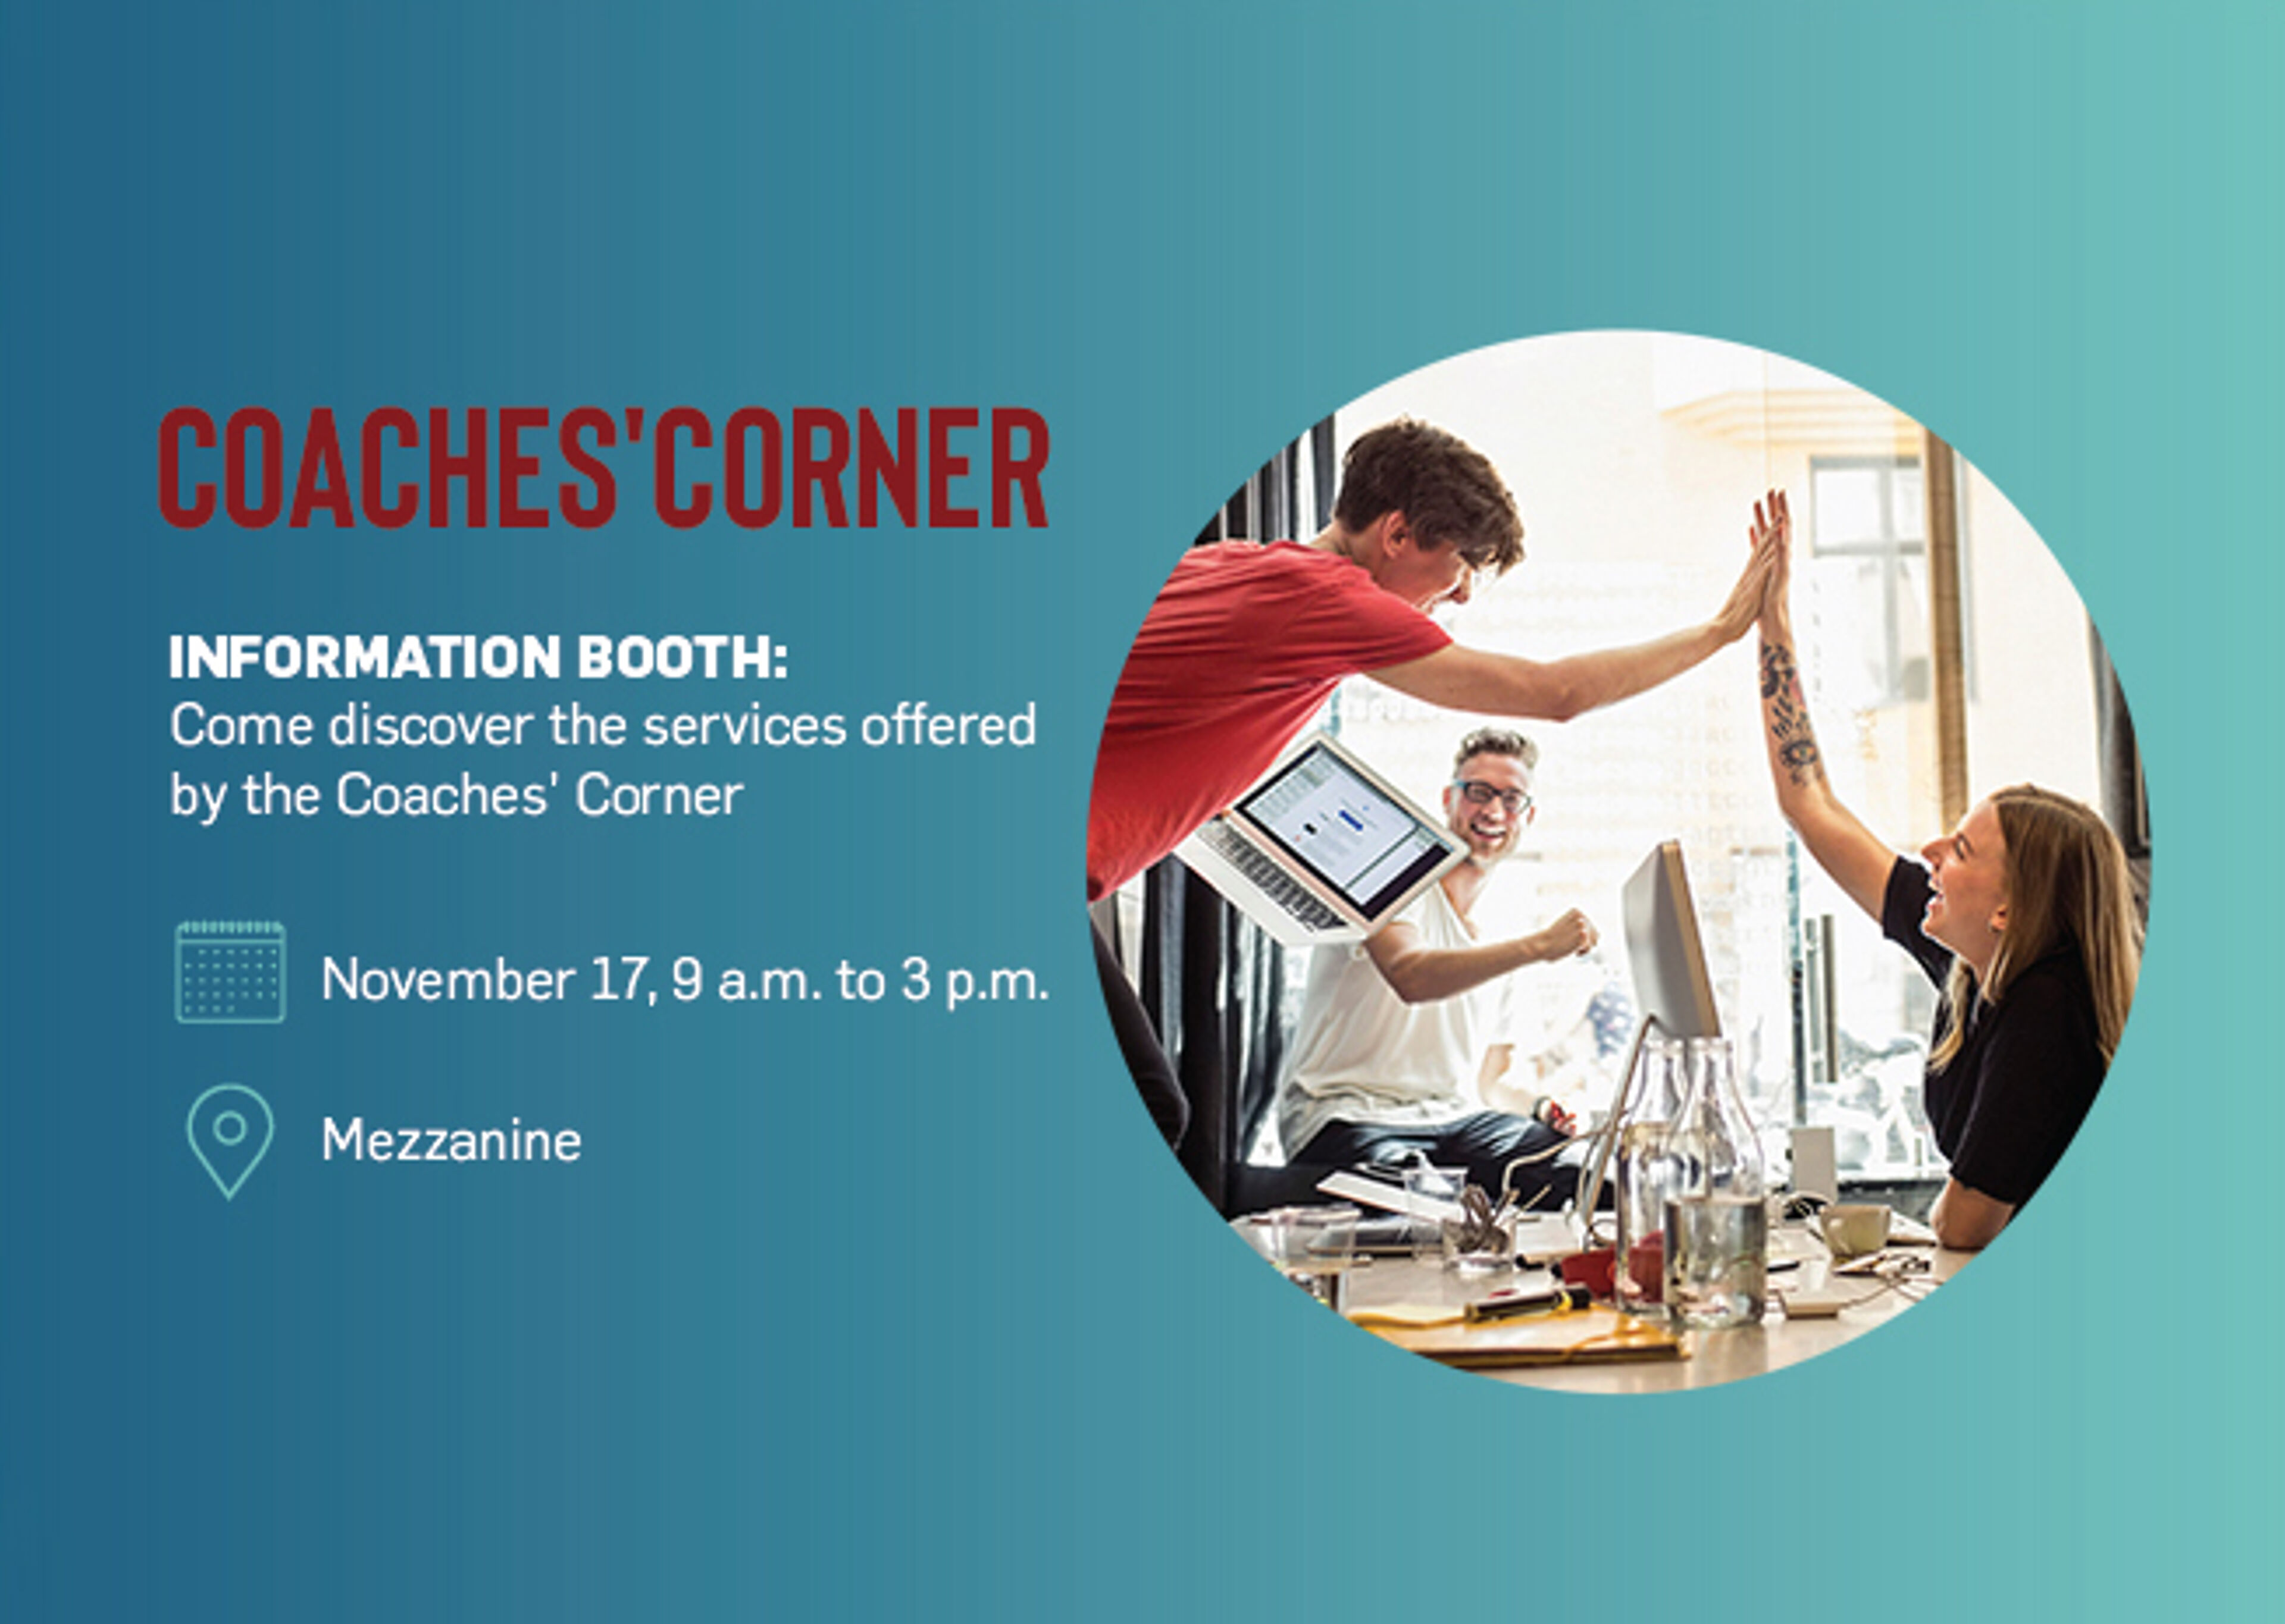 Promotional material for Coaches' Corner, showing a team celebrating, with details of an information booth on November 17 from 9 a.m. to 3 p.m. at the Mezzanine.